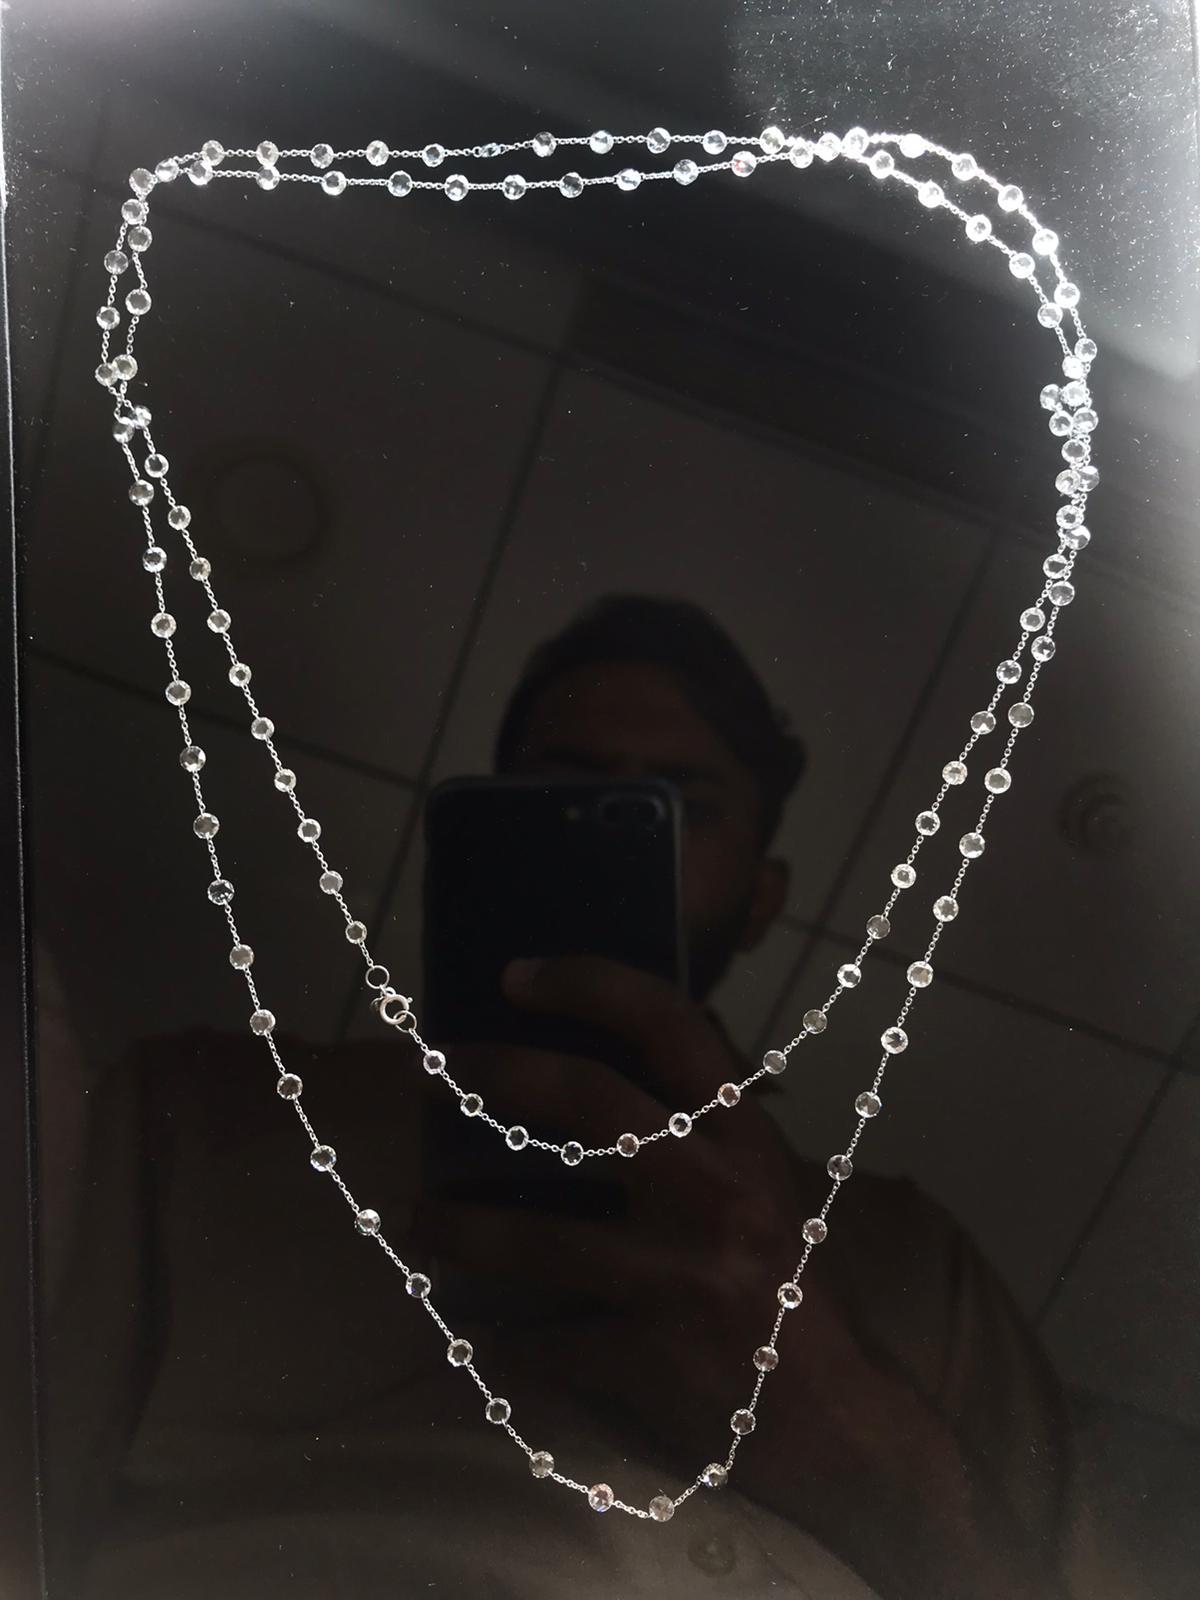 PANIM 9 Carats Diamond Rosecut 18k White Gold Necklace In New Condition For Sale In Tsim Sha Tsui, Hong Kong